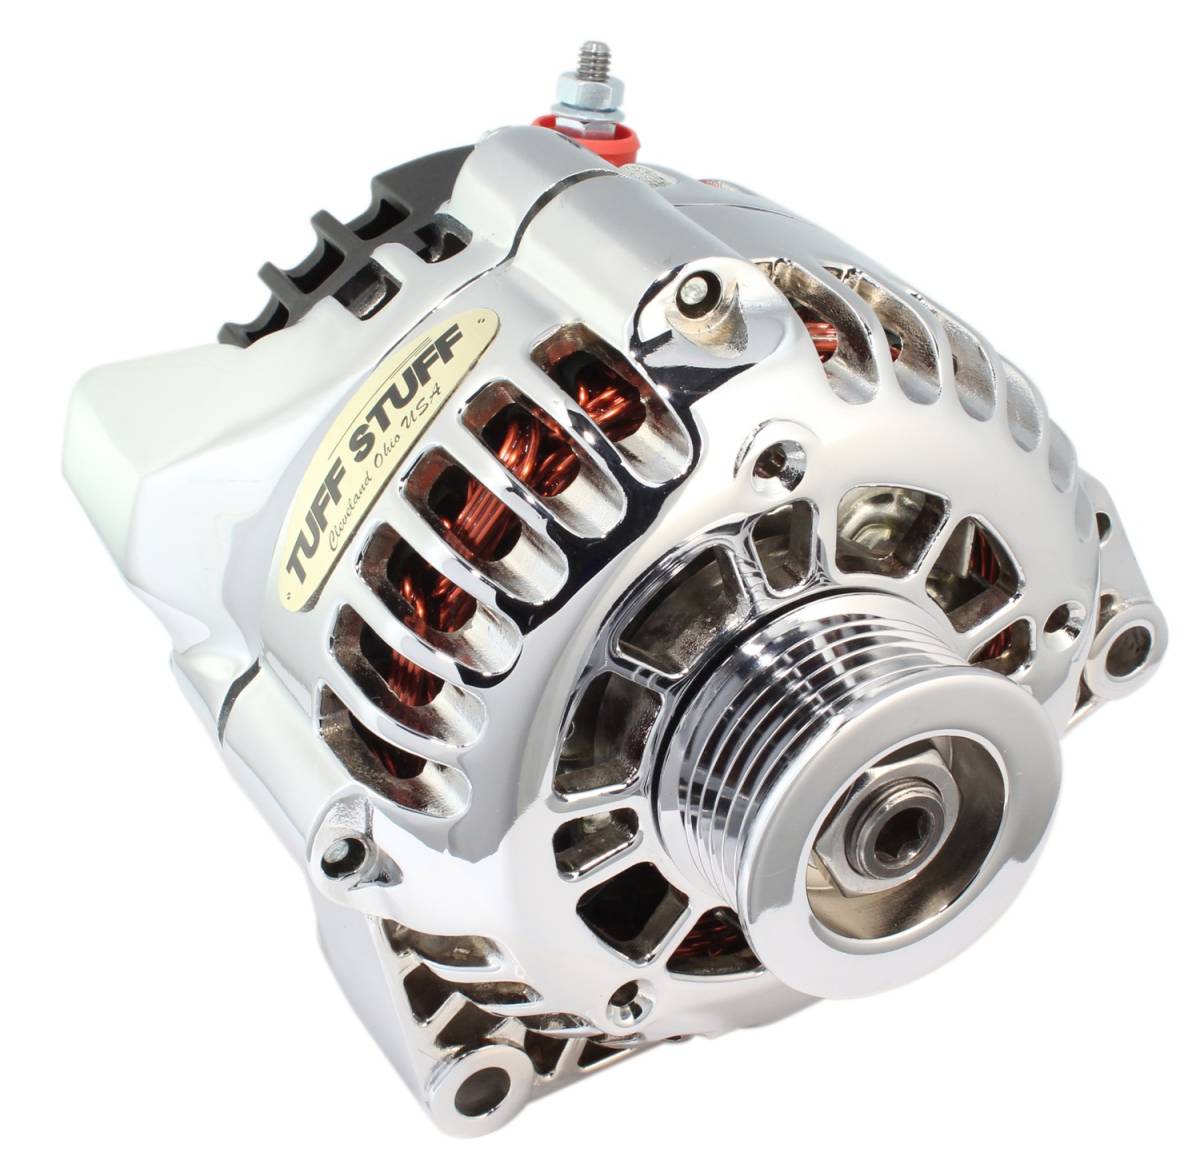 Tuff Stuff Performance - Alternator 175 AMP Upgrade Chrome Plated 1-Wire Or OEM Hookup Side Post 6 Groove Pulley 8206NC1